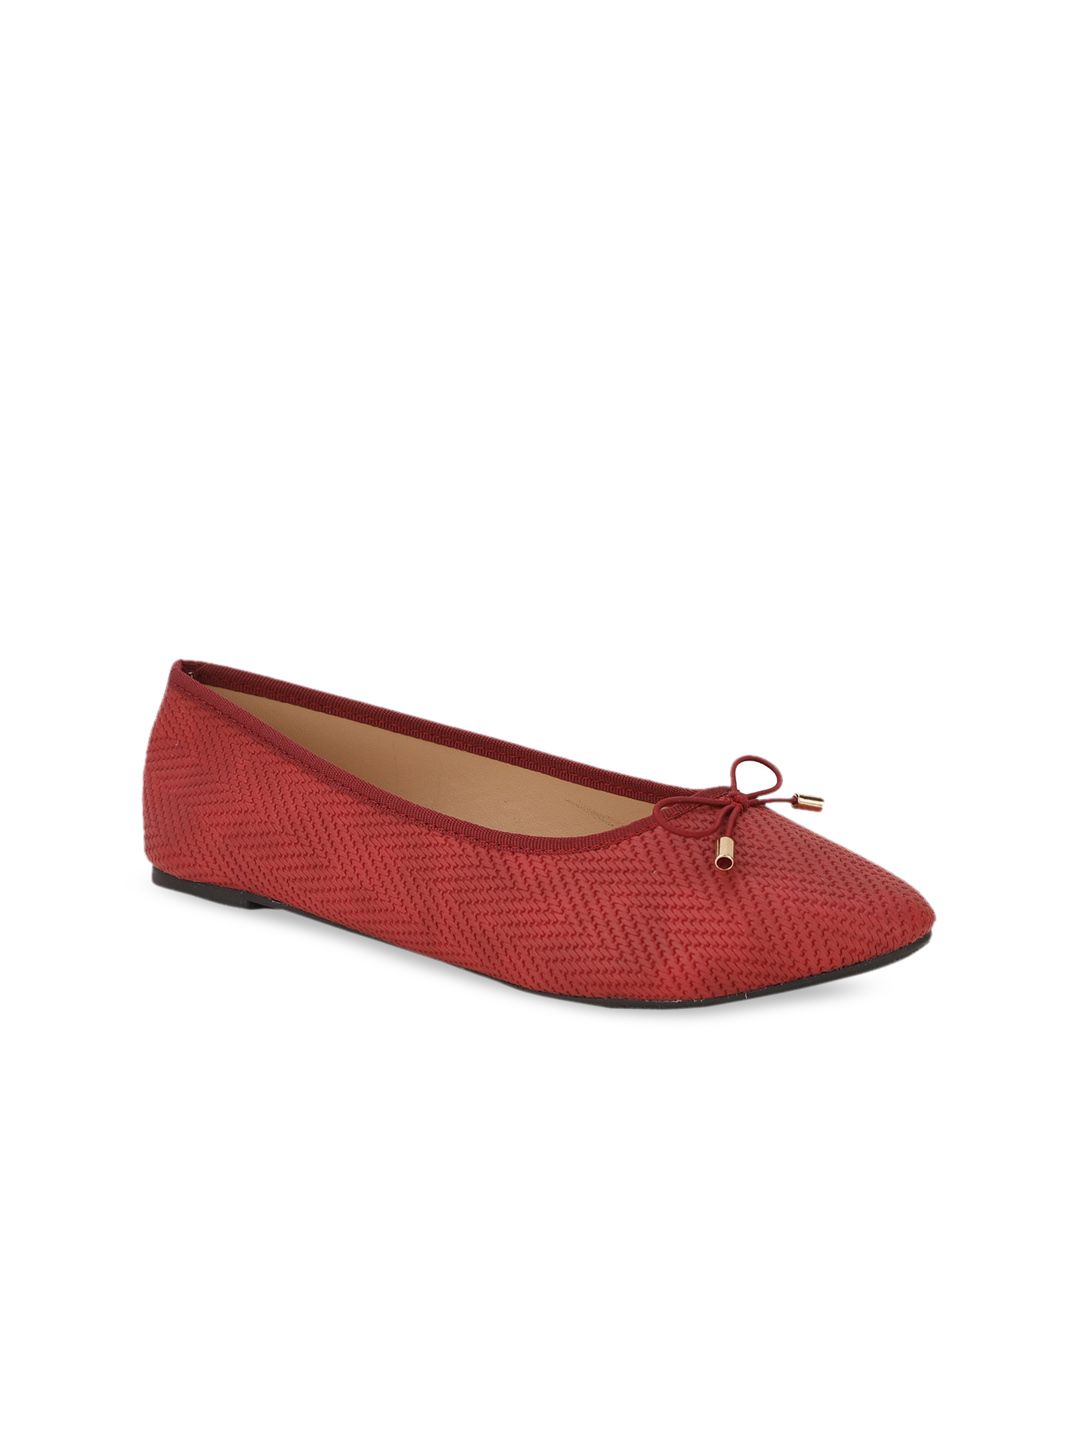 Bata Women Maroon Textured Ballerinas with Bows Flats Price in India